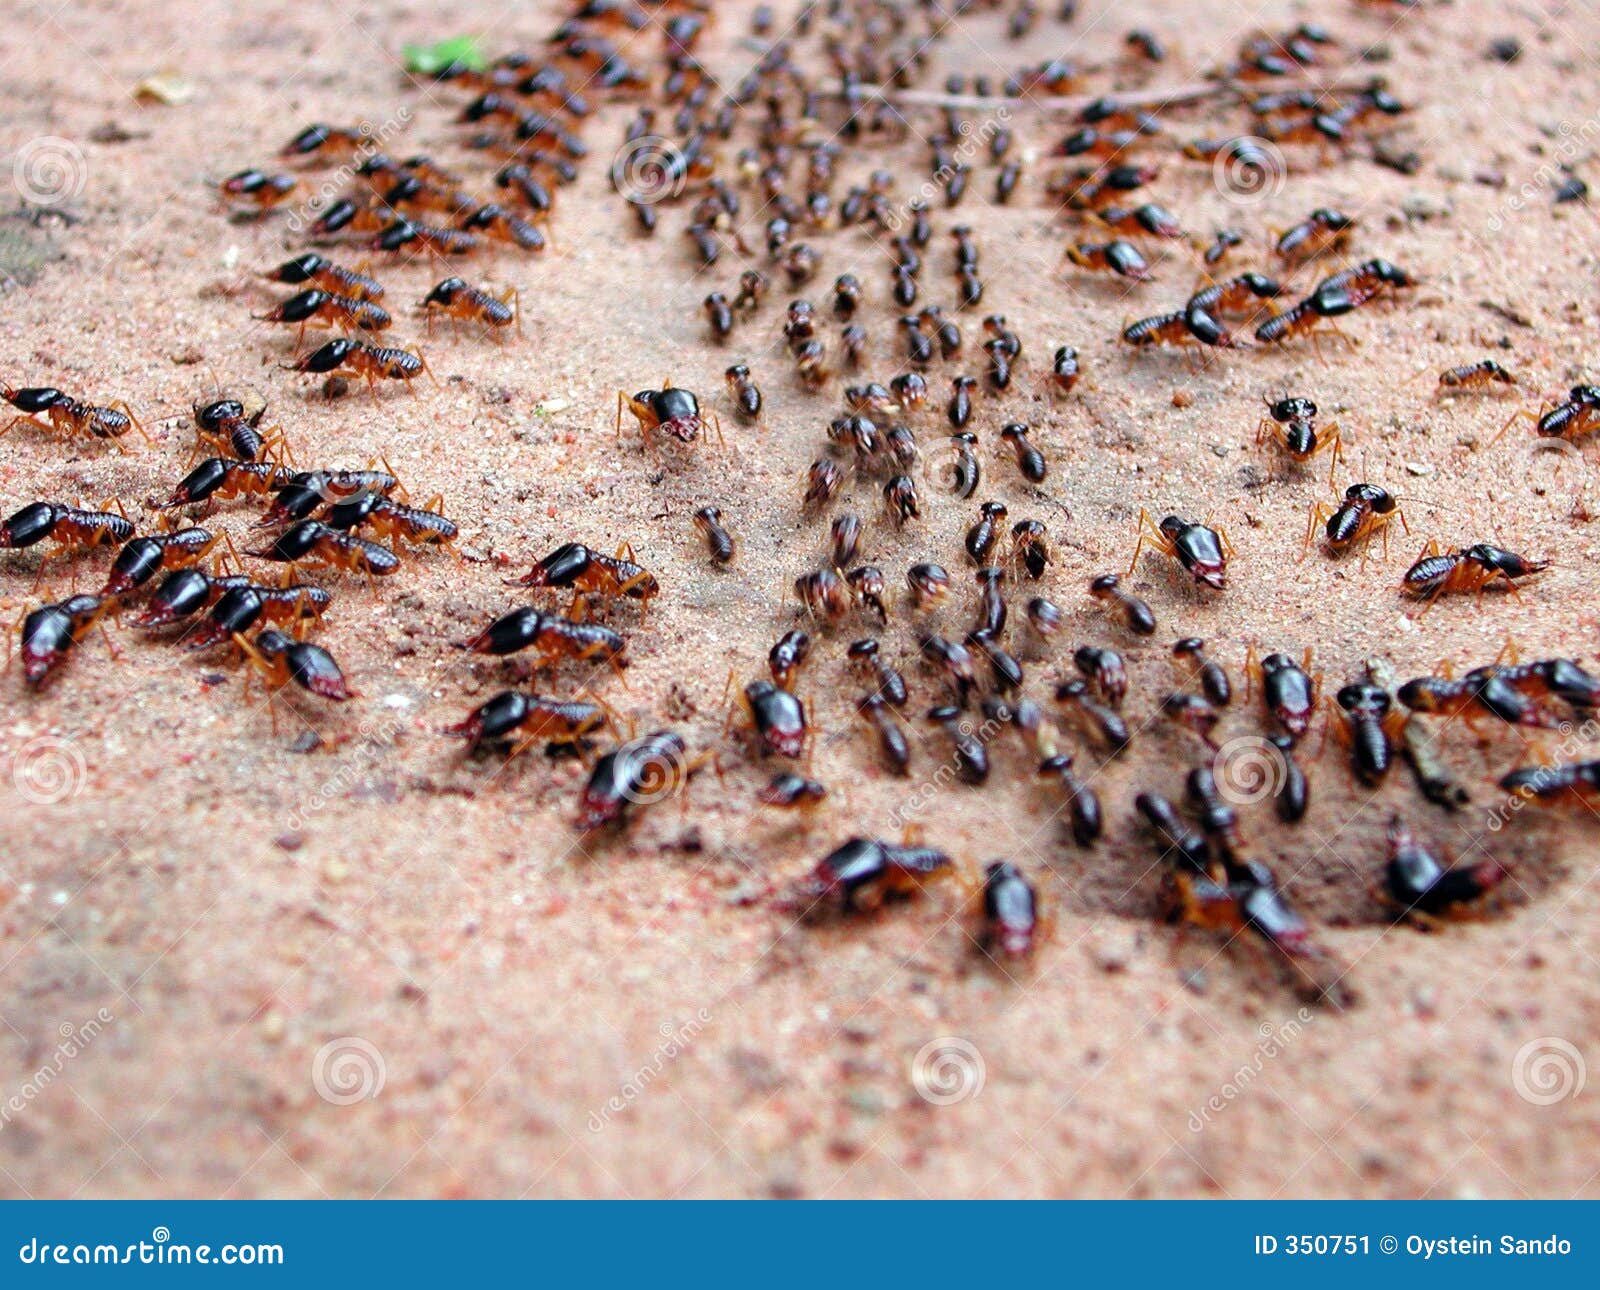 A Group Of Ants 74